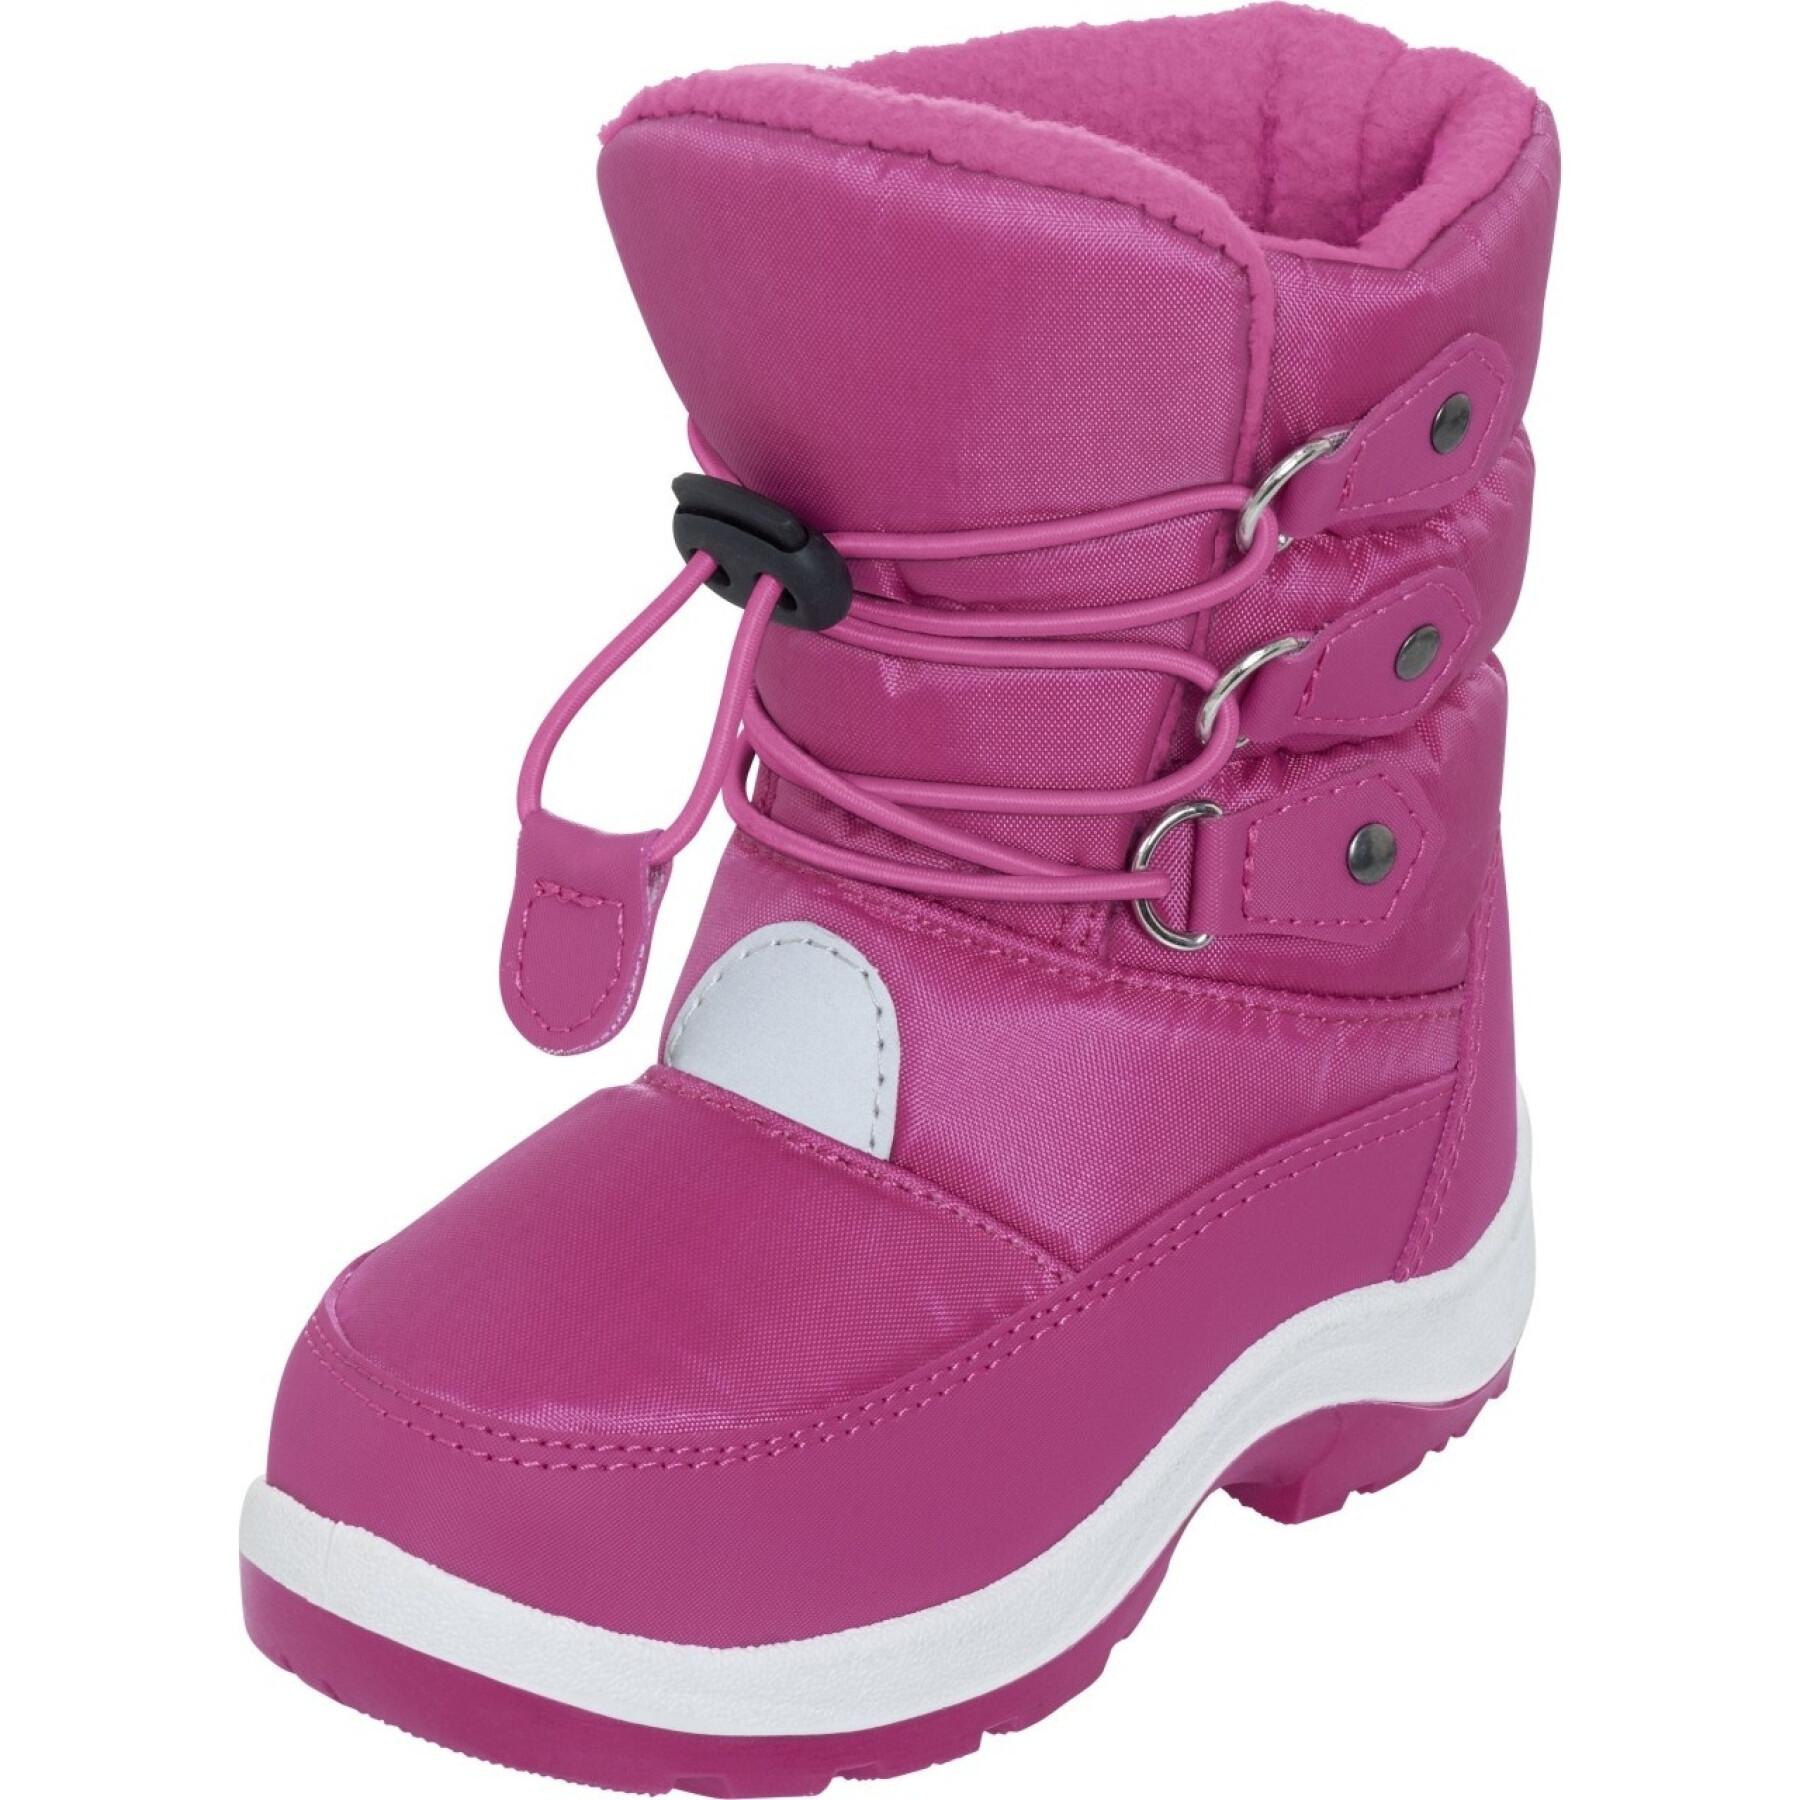 Baby hook-and-loop winter boots Playshoes